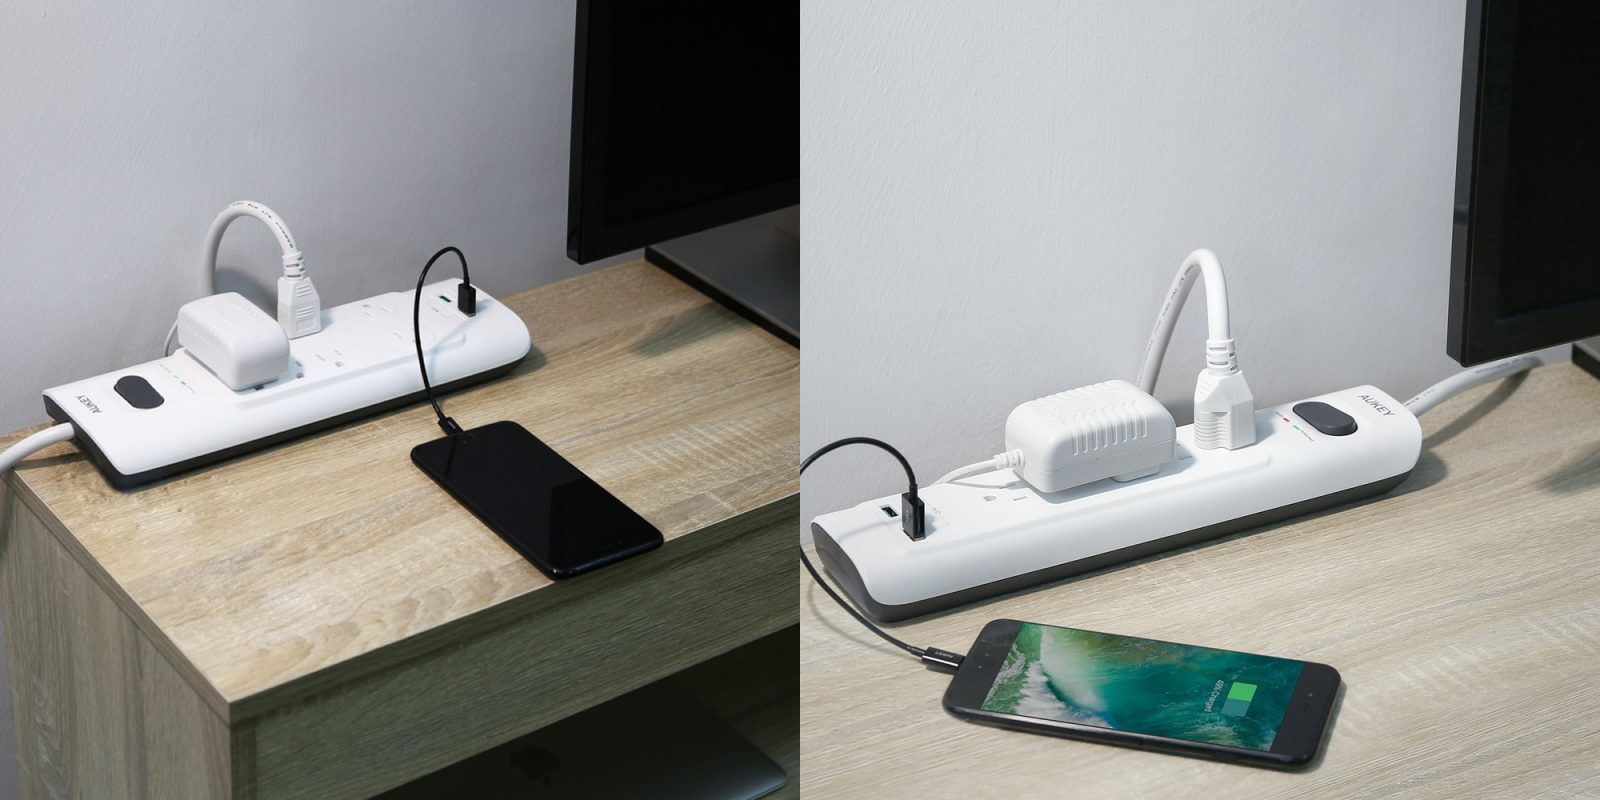 Add Aukey S Dual Usb Port Surge Protectors To Your Nightstand Or